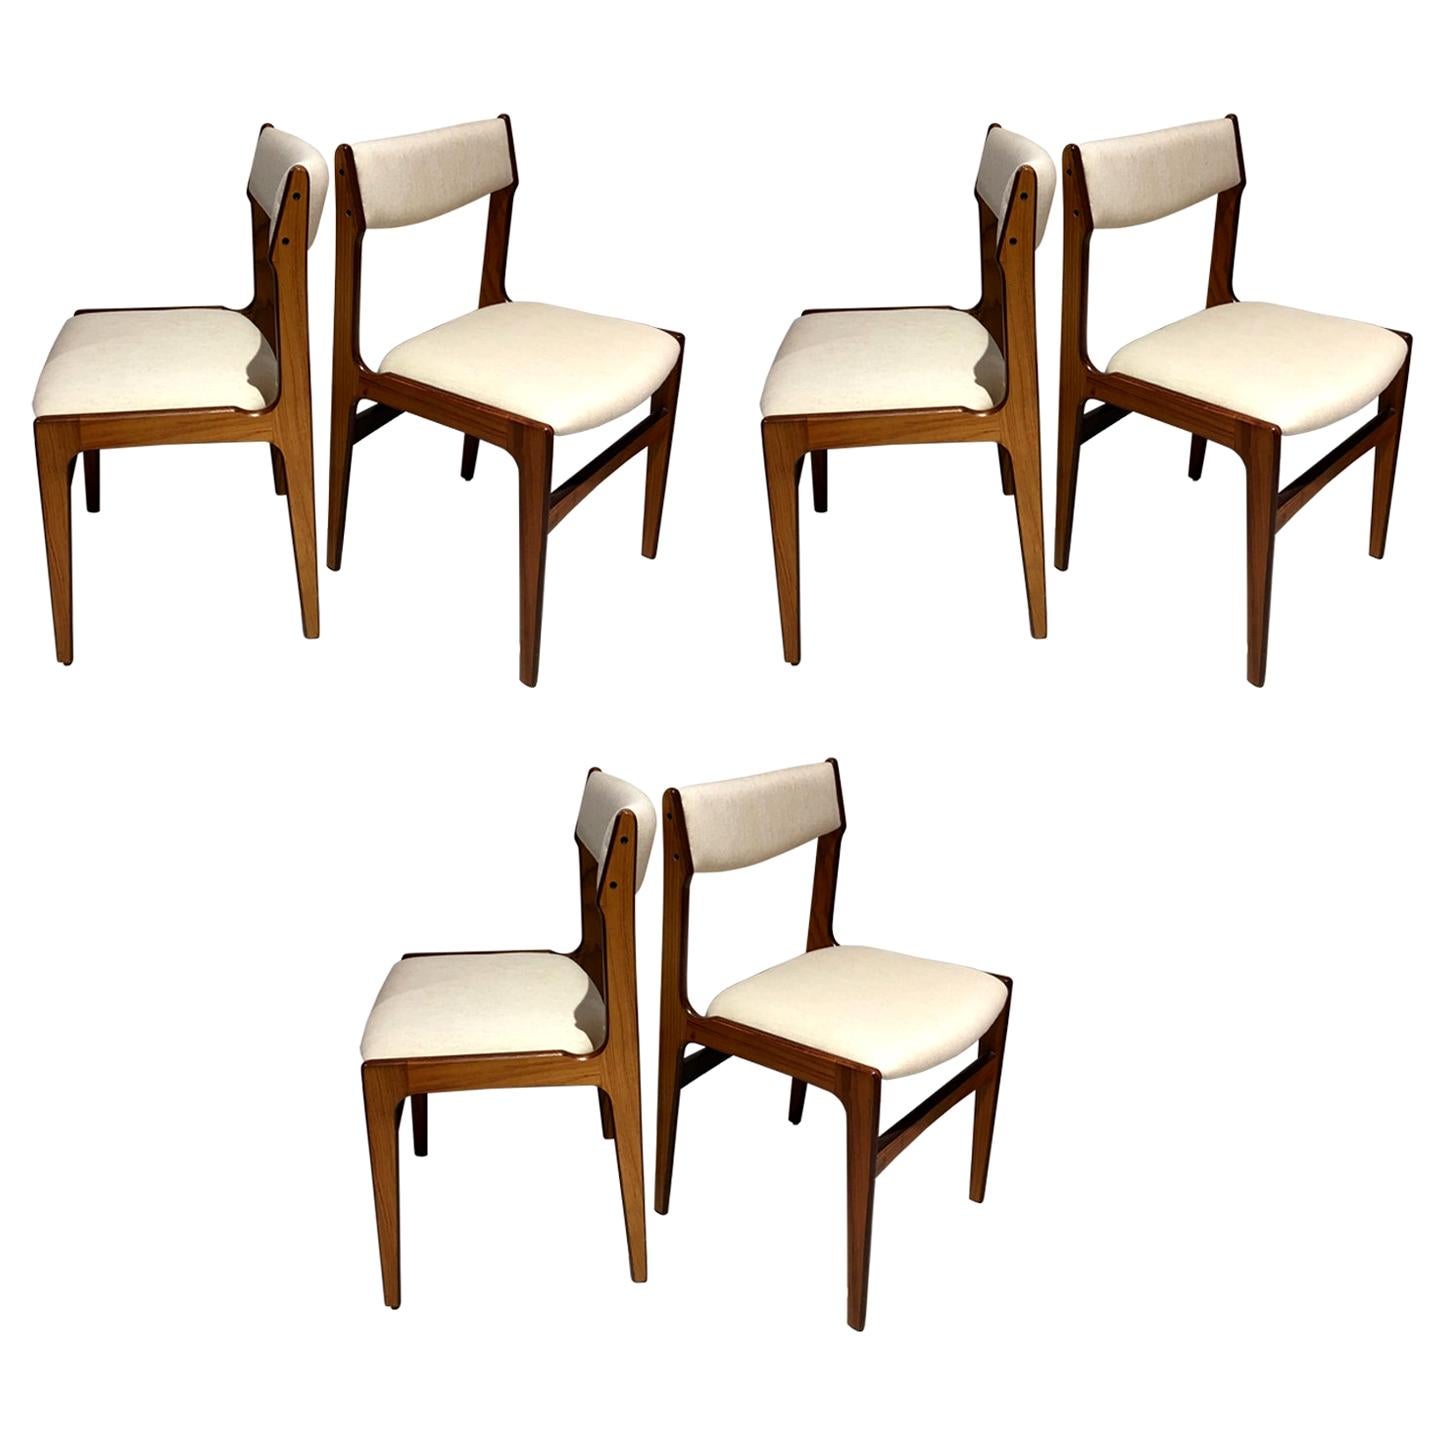 Set of Six Midcentury Danish Wooden Dining Chairs with White Covers